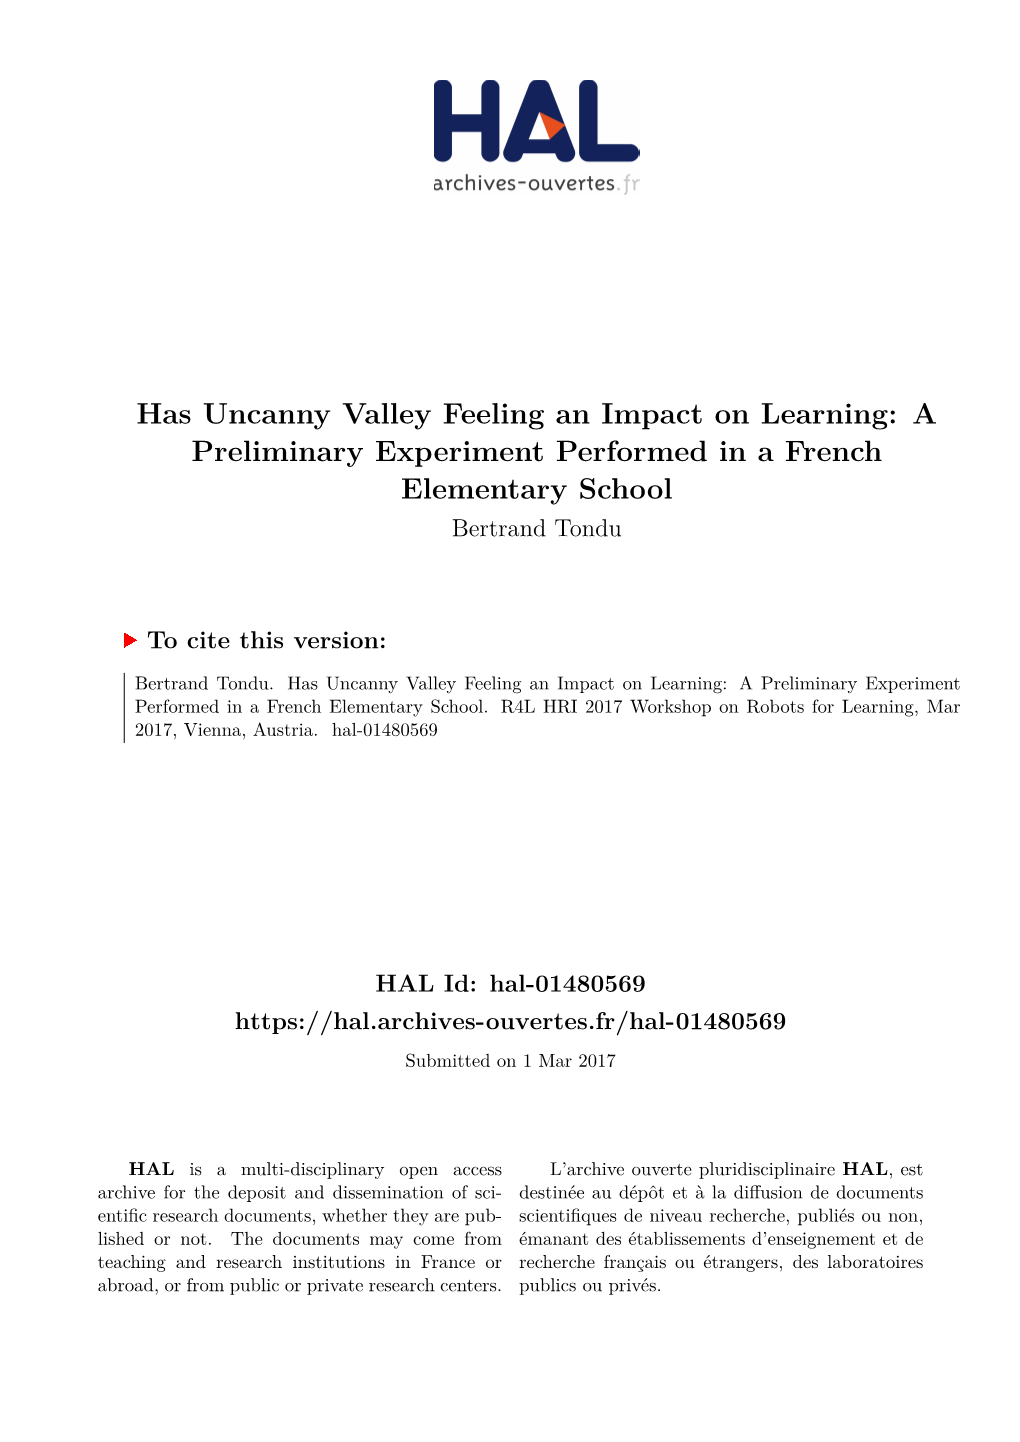 Has Uncanny Valley Feeling an Impact on Learning: a Preliminary Experiment Performed in a French Elementary School Bertrand Tondu